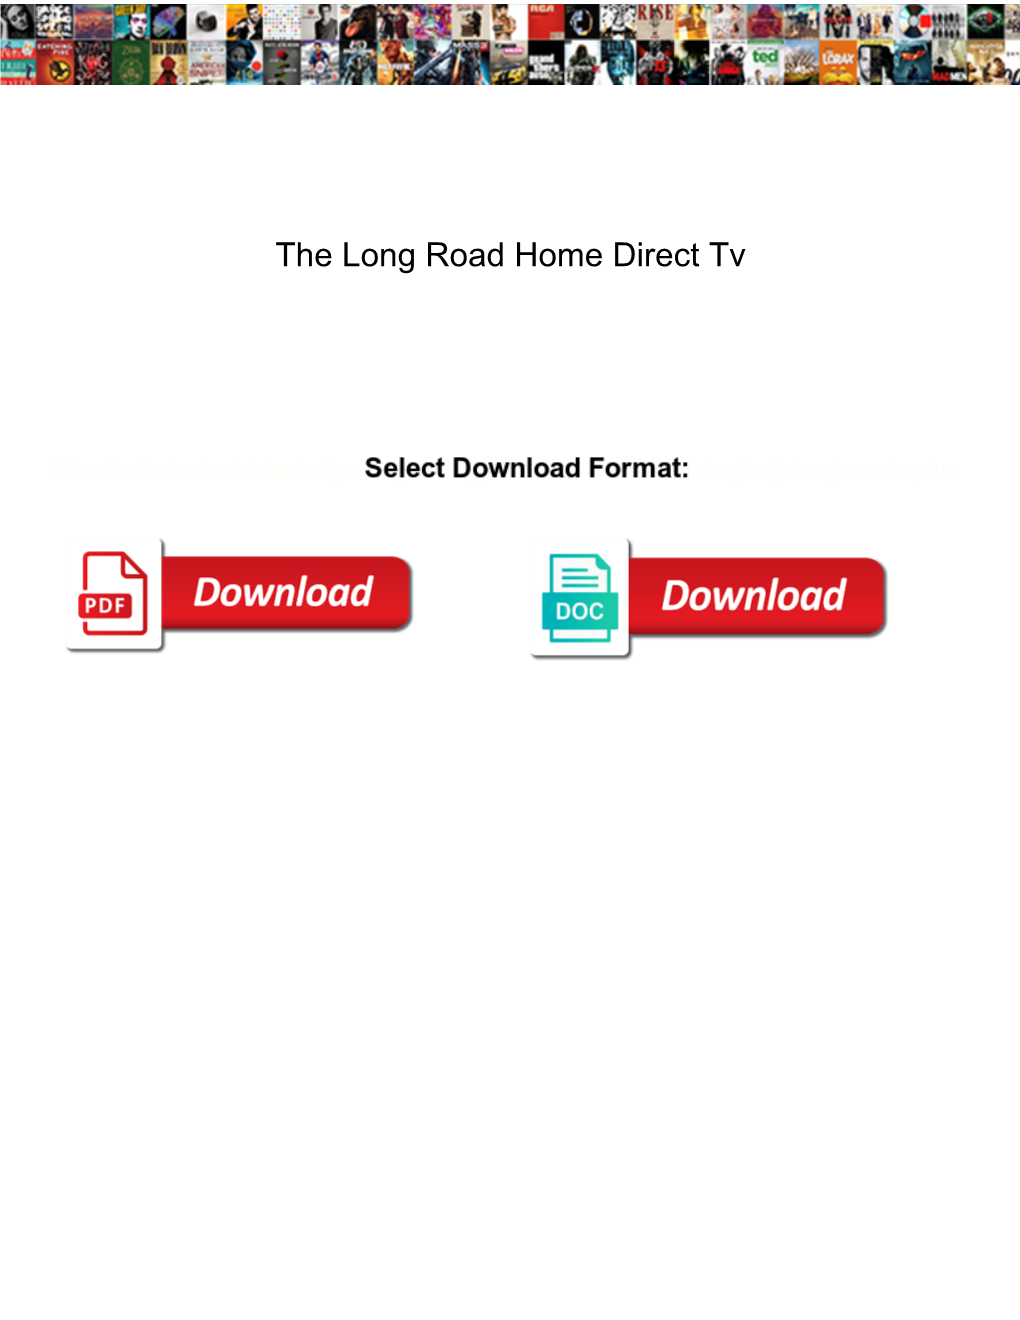 The Long Road Home Direct Tv